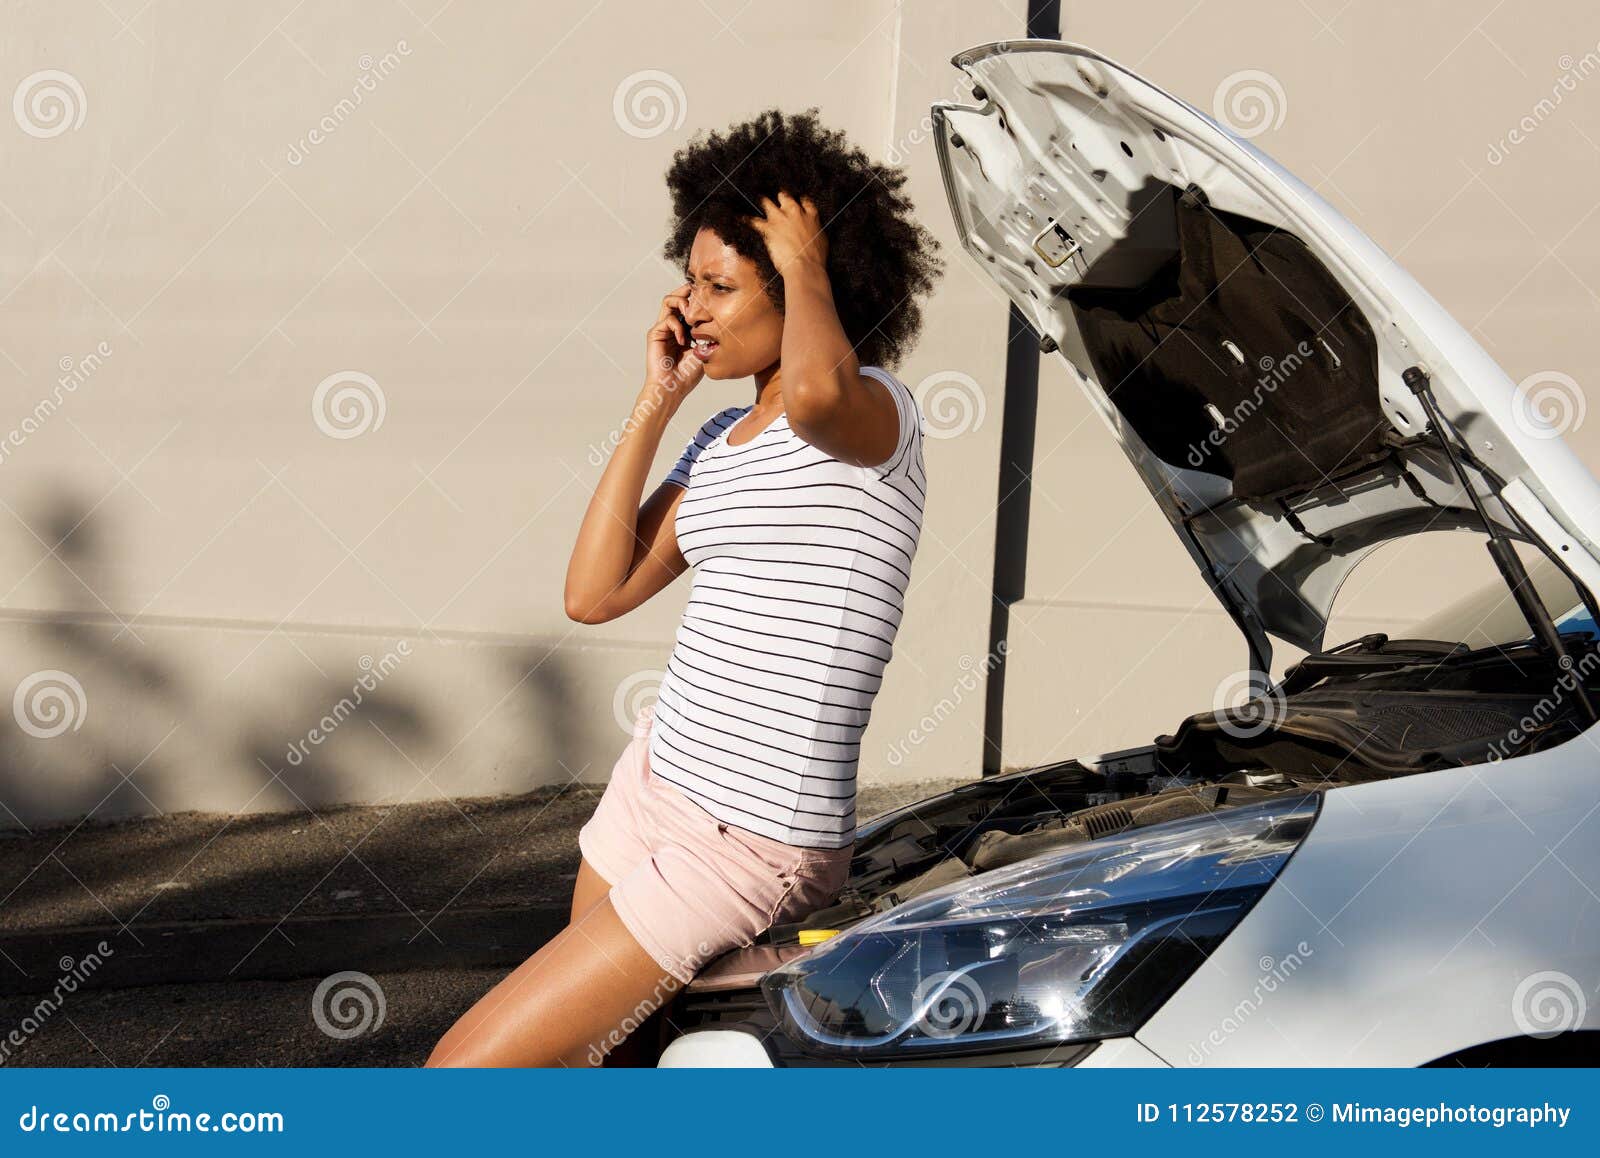 young woman standing by broken down car and making phone call for assistance